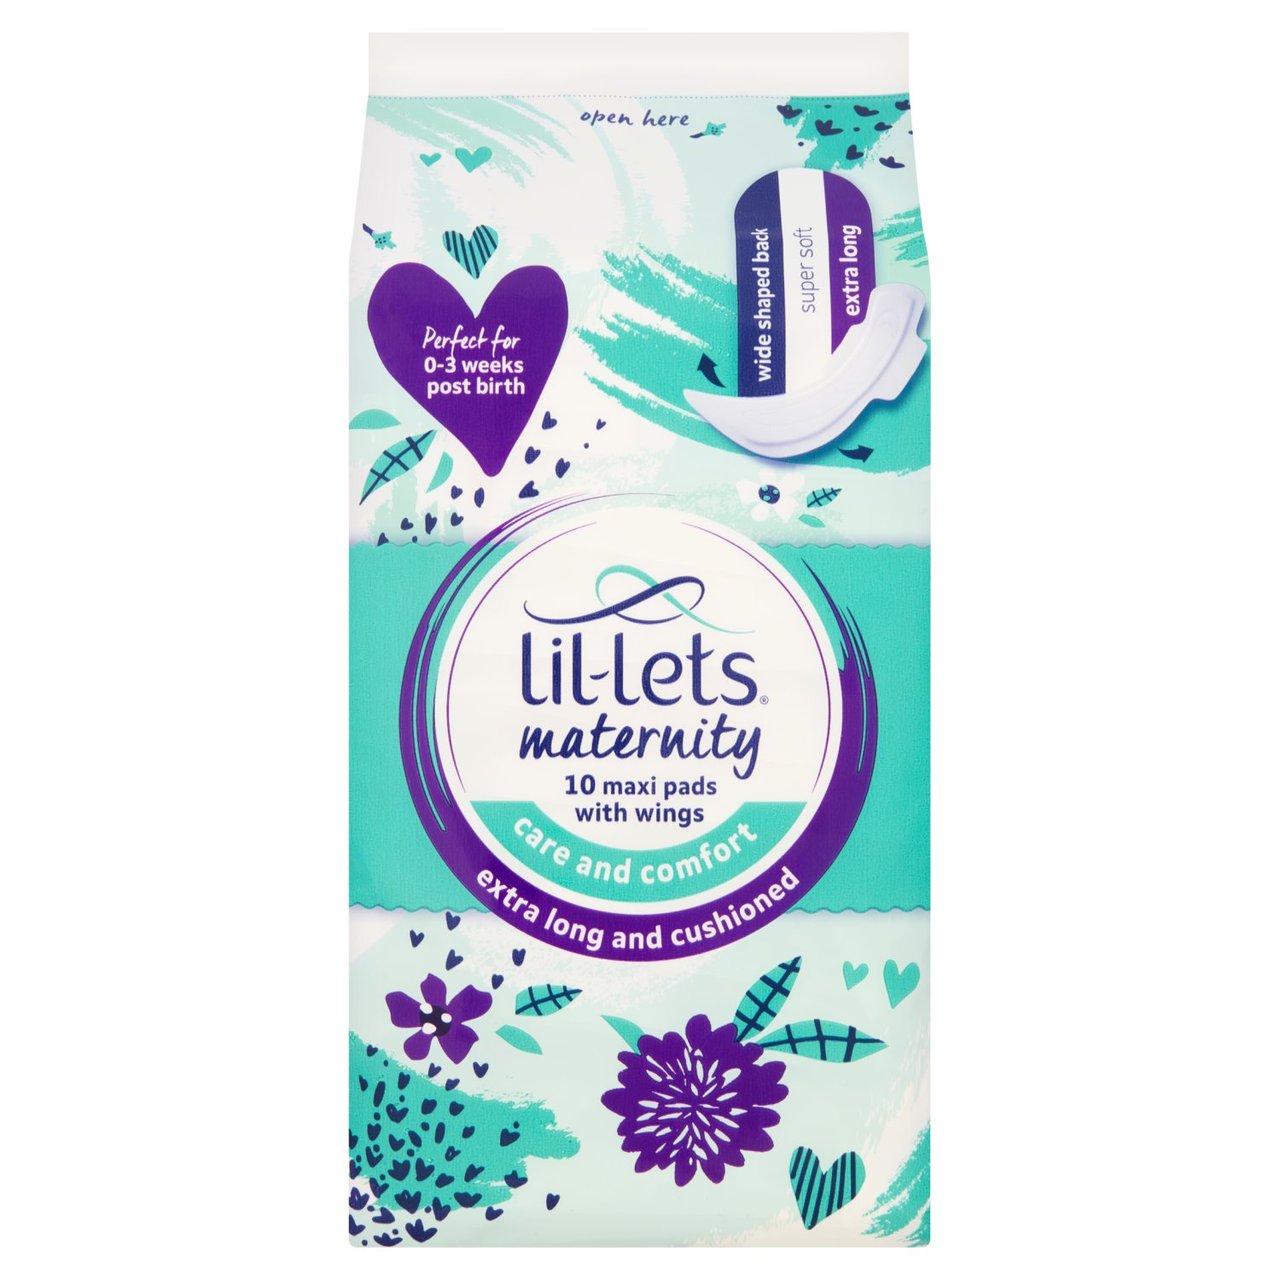 Lil-Lets Maternity Pads 10 per pack